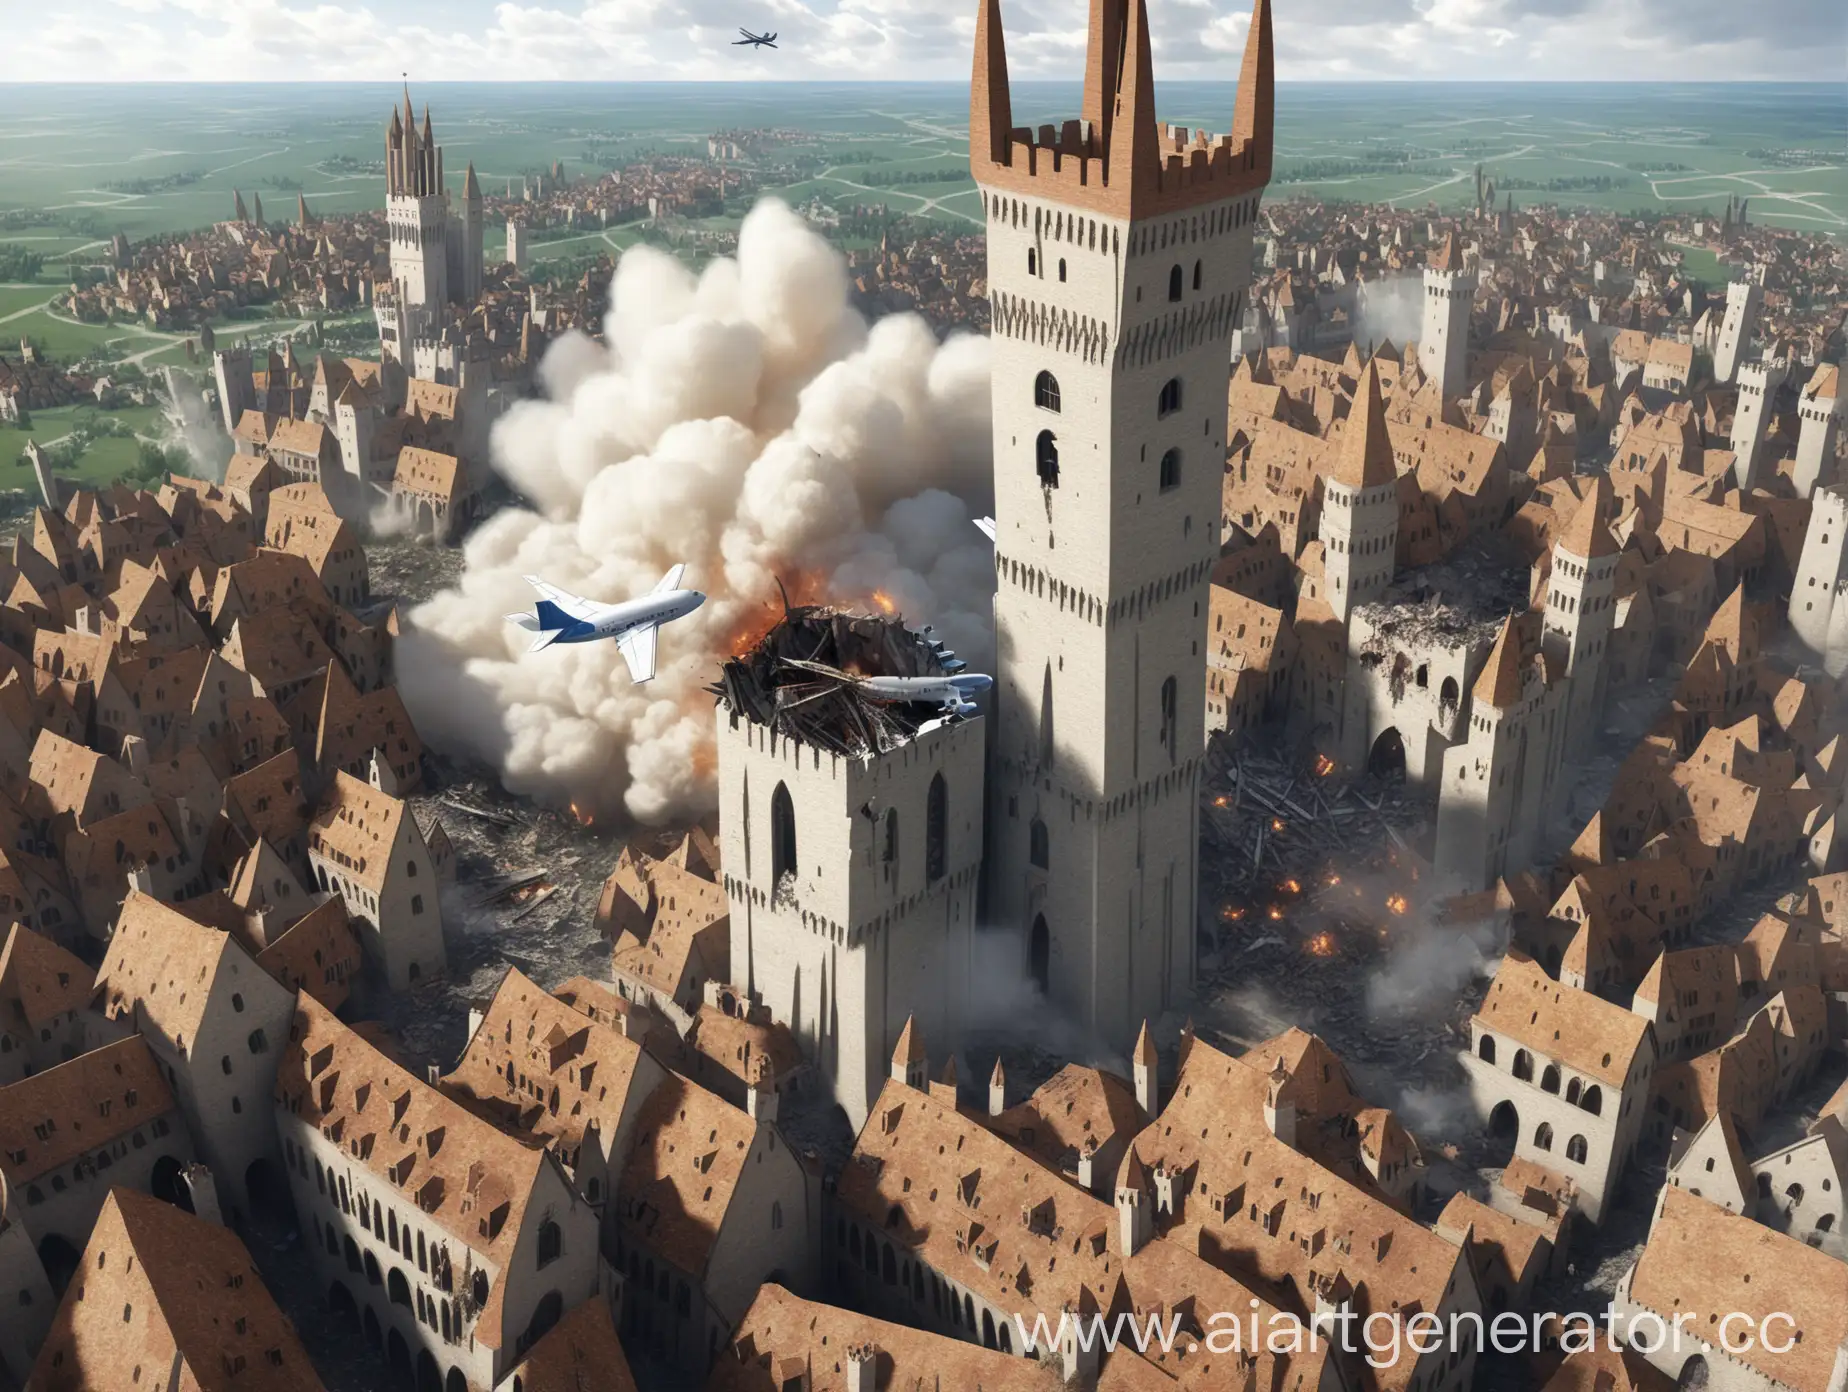 Modern-Plane-Crashes-into-Medieval-City-Tower-Catastrophic-Collision-Scene